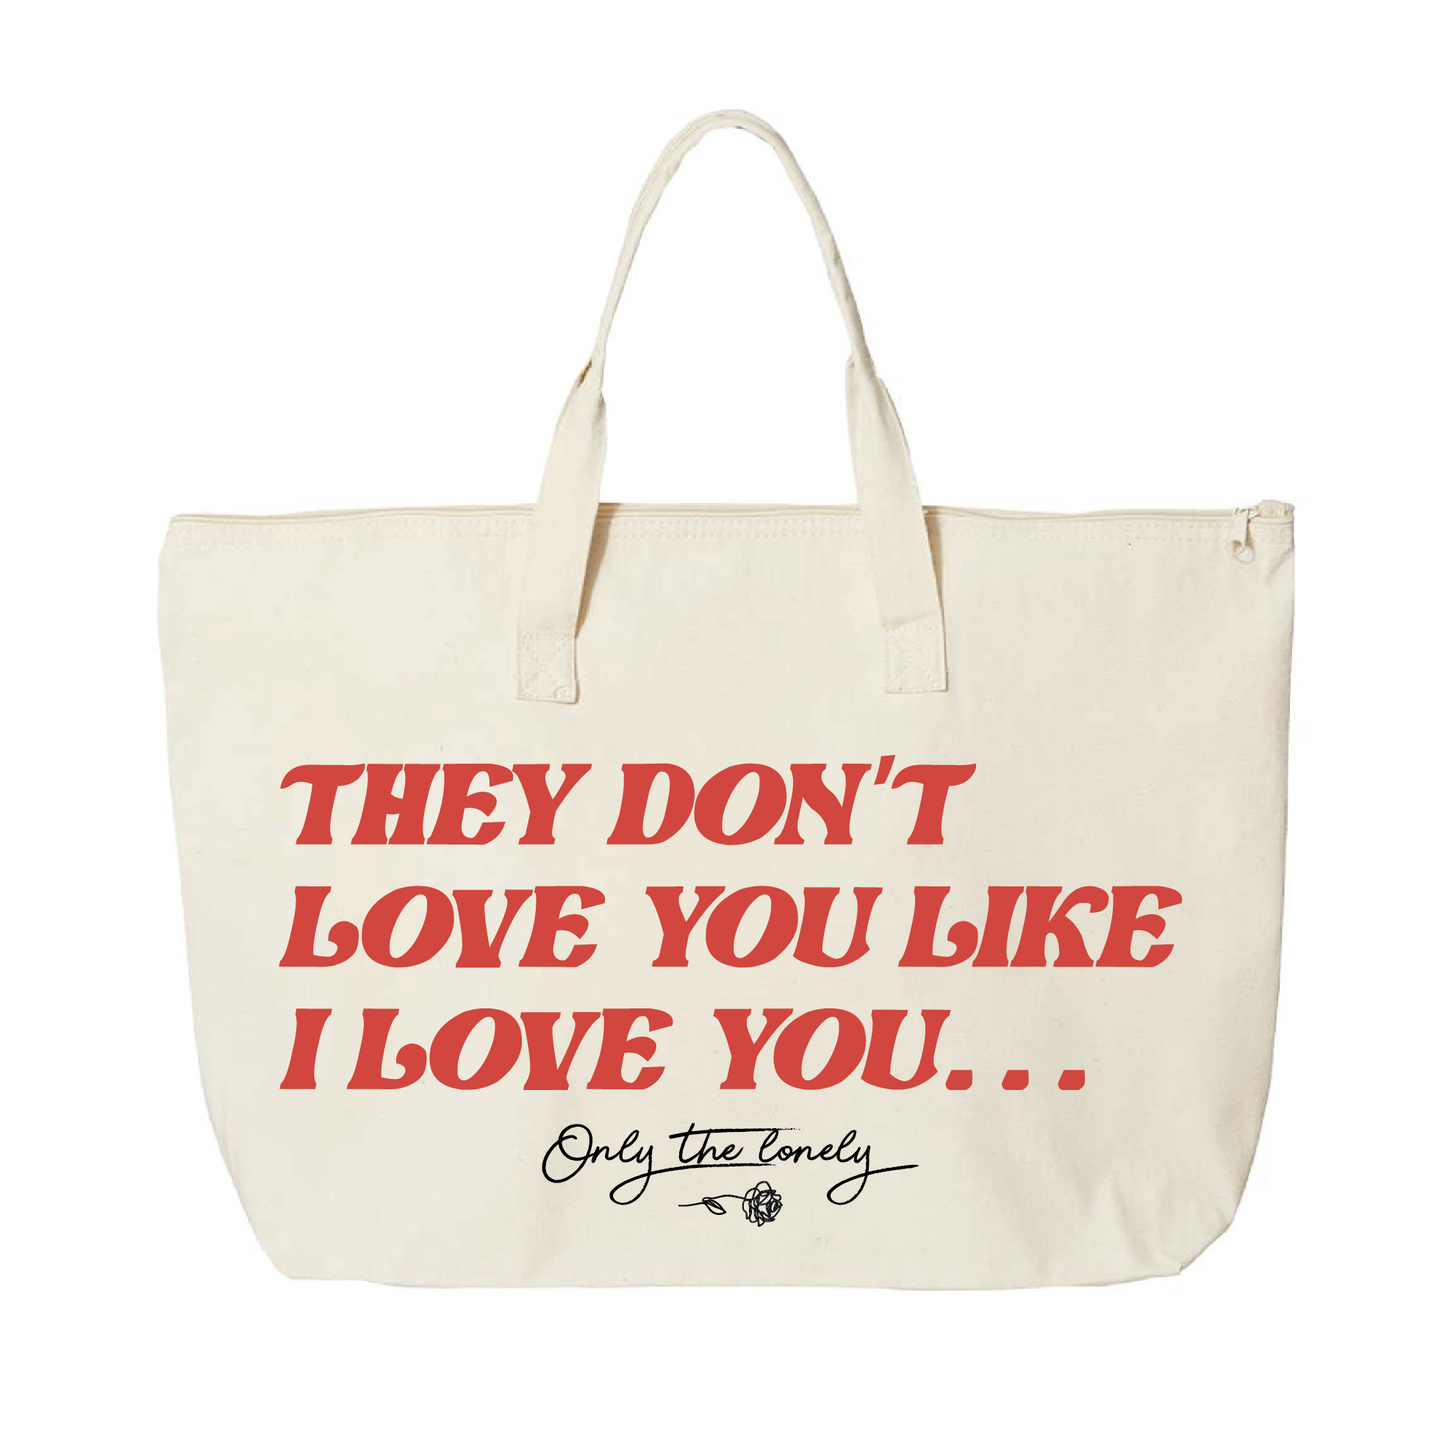 ONLY THE LONELY "THEY DON'T LOVE YOU LIKE I LOVE YOU" TOTE BAG